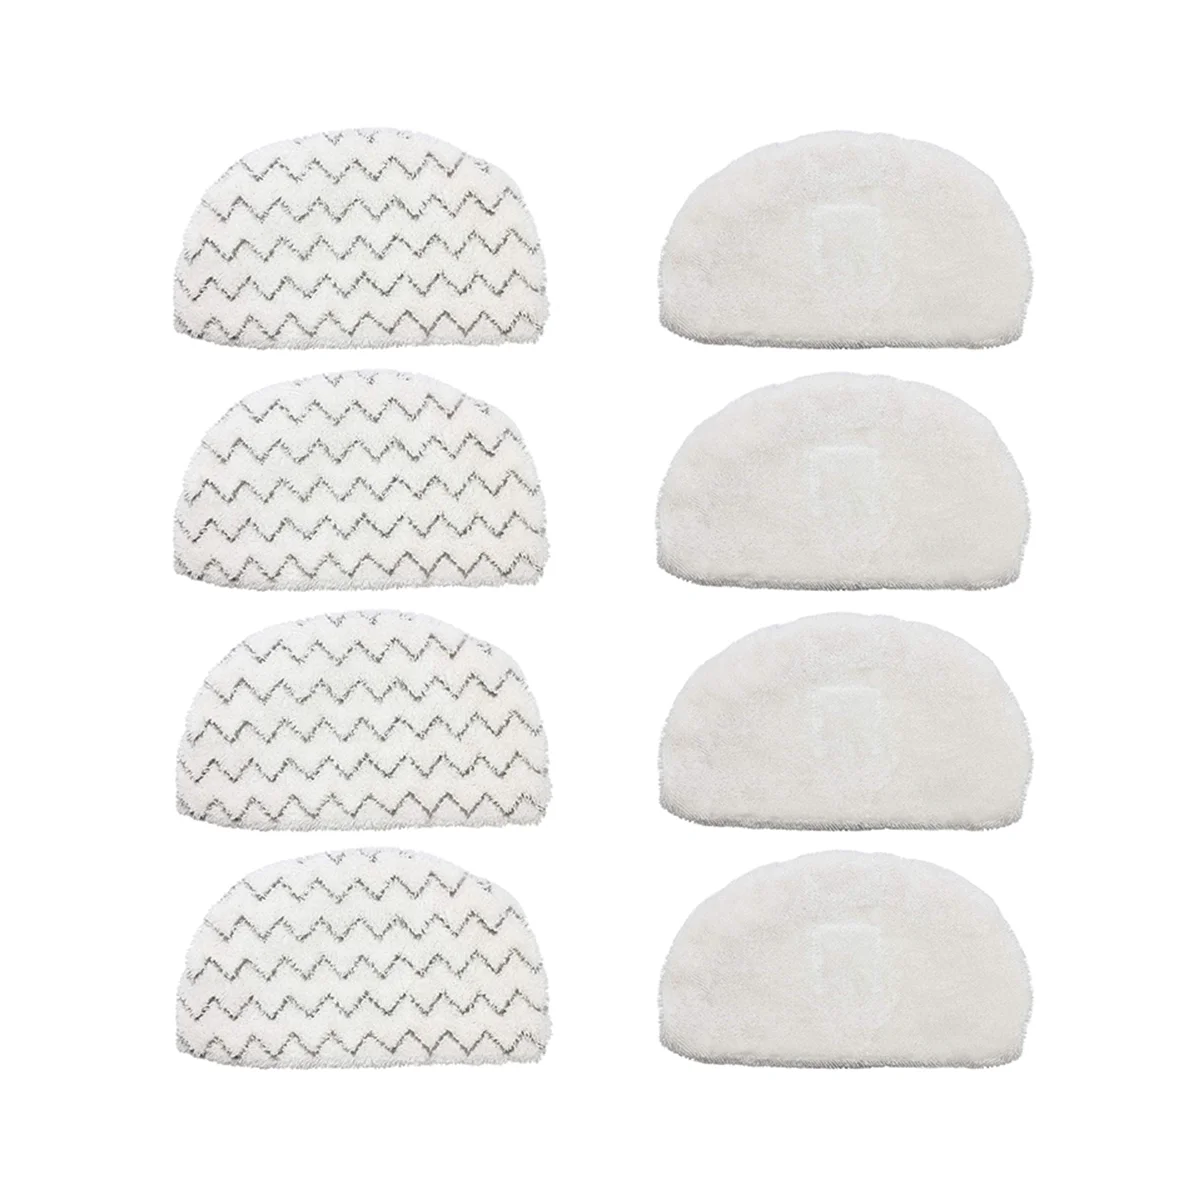 

8PCS Replacement Washable Steam Mop Pads forBissell Powerfresh 1940 1440 Steam Mop Model Cleaning Parts